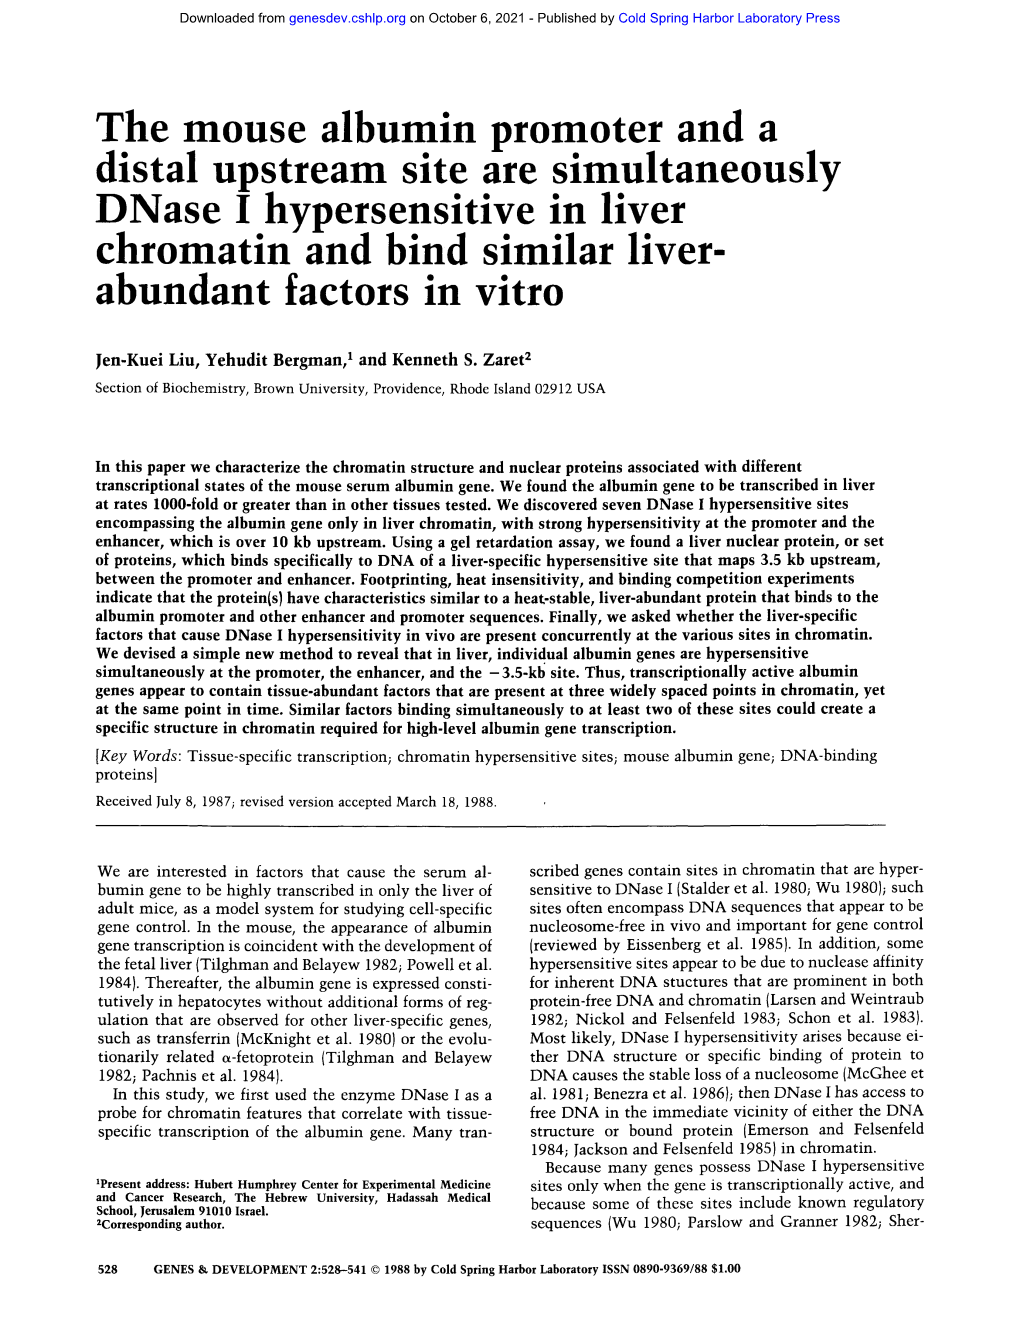 The Mouse Albumin Promoter and a Distal Upstream Site Are Simultaneously Dnase I Hypersensitive in Liver Chromatin and Bind Similar Liver- Abundant Factors in Vitro